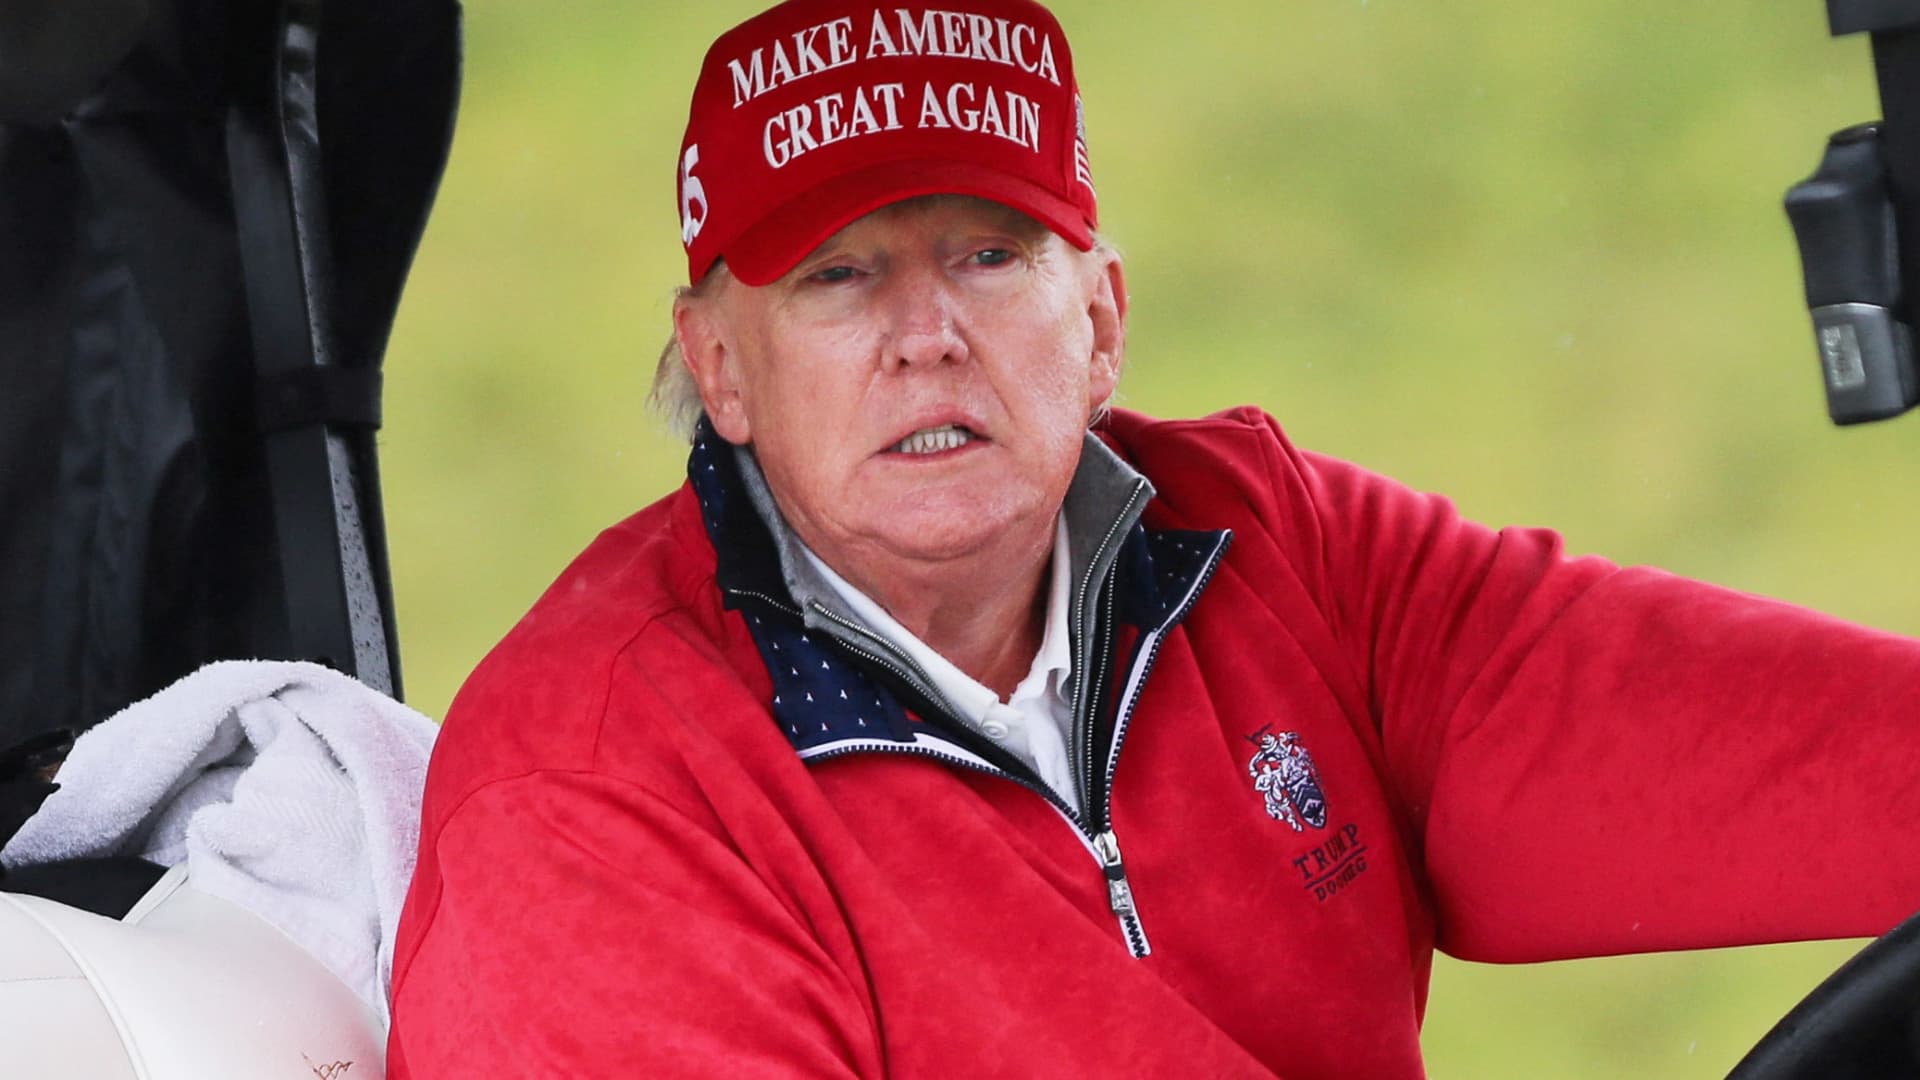 Former U.S. President and Republican presidential candidate Donald Trump rides a golf cart at Trump International Golf Links course, in Doonbeg, Ireland May 4, 2023.